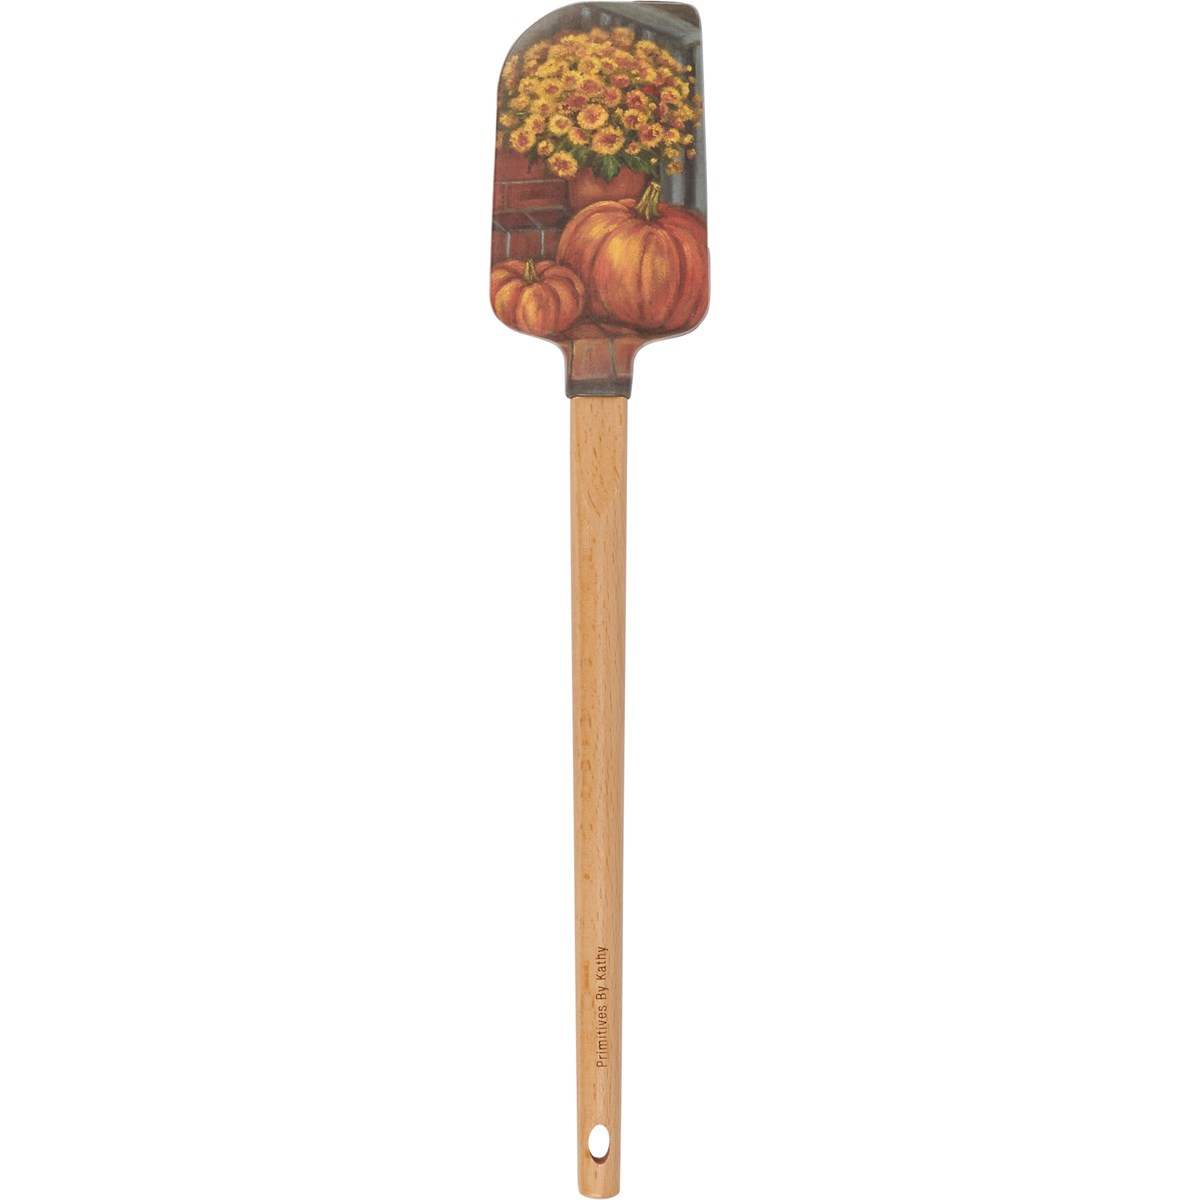 Spatula - Porch Steps And Flowers - 2.50" x 13" x 0.50" - Silicone, Wood